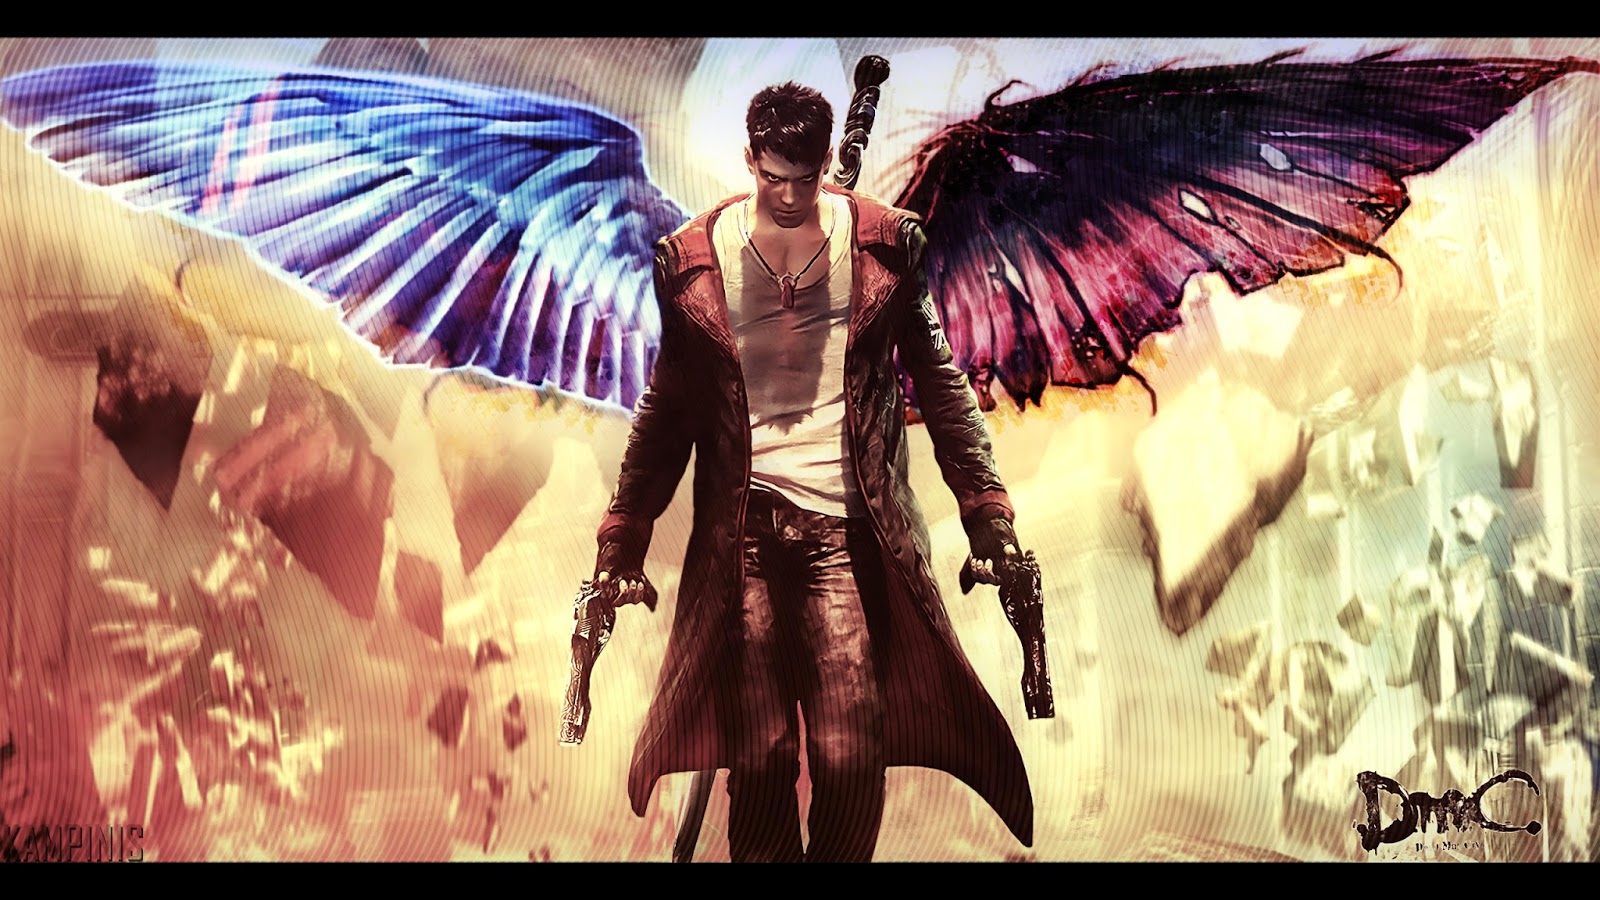 DmC: Devil May Cry Definitive Edition Review – Back in Limbo